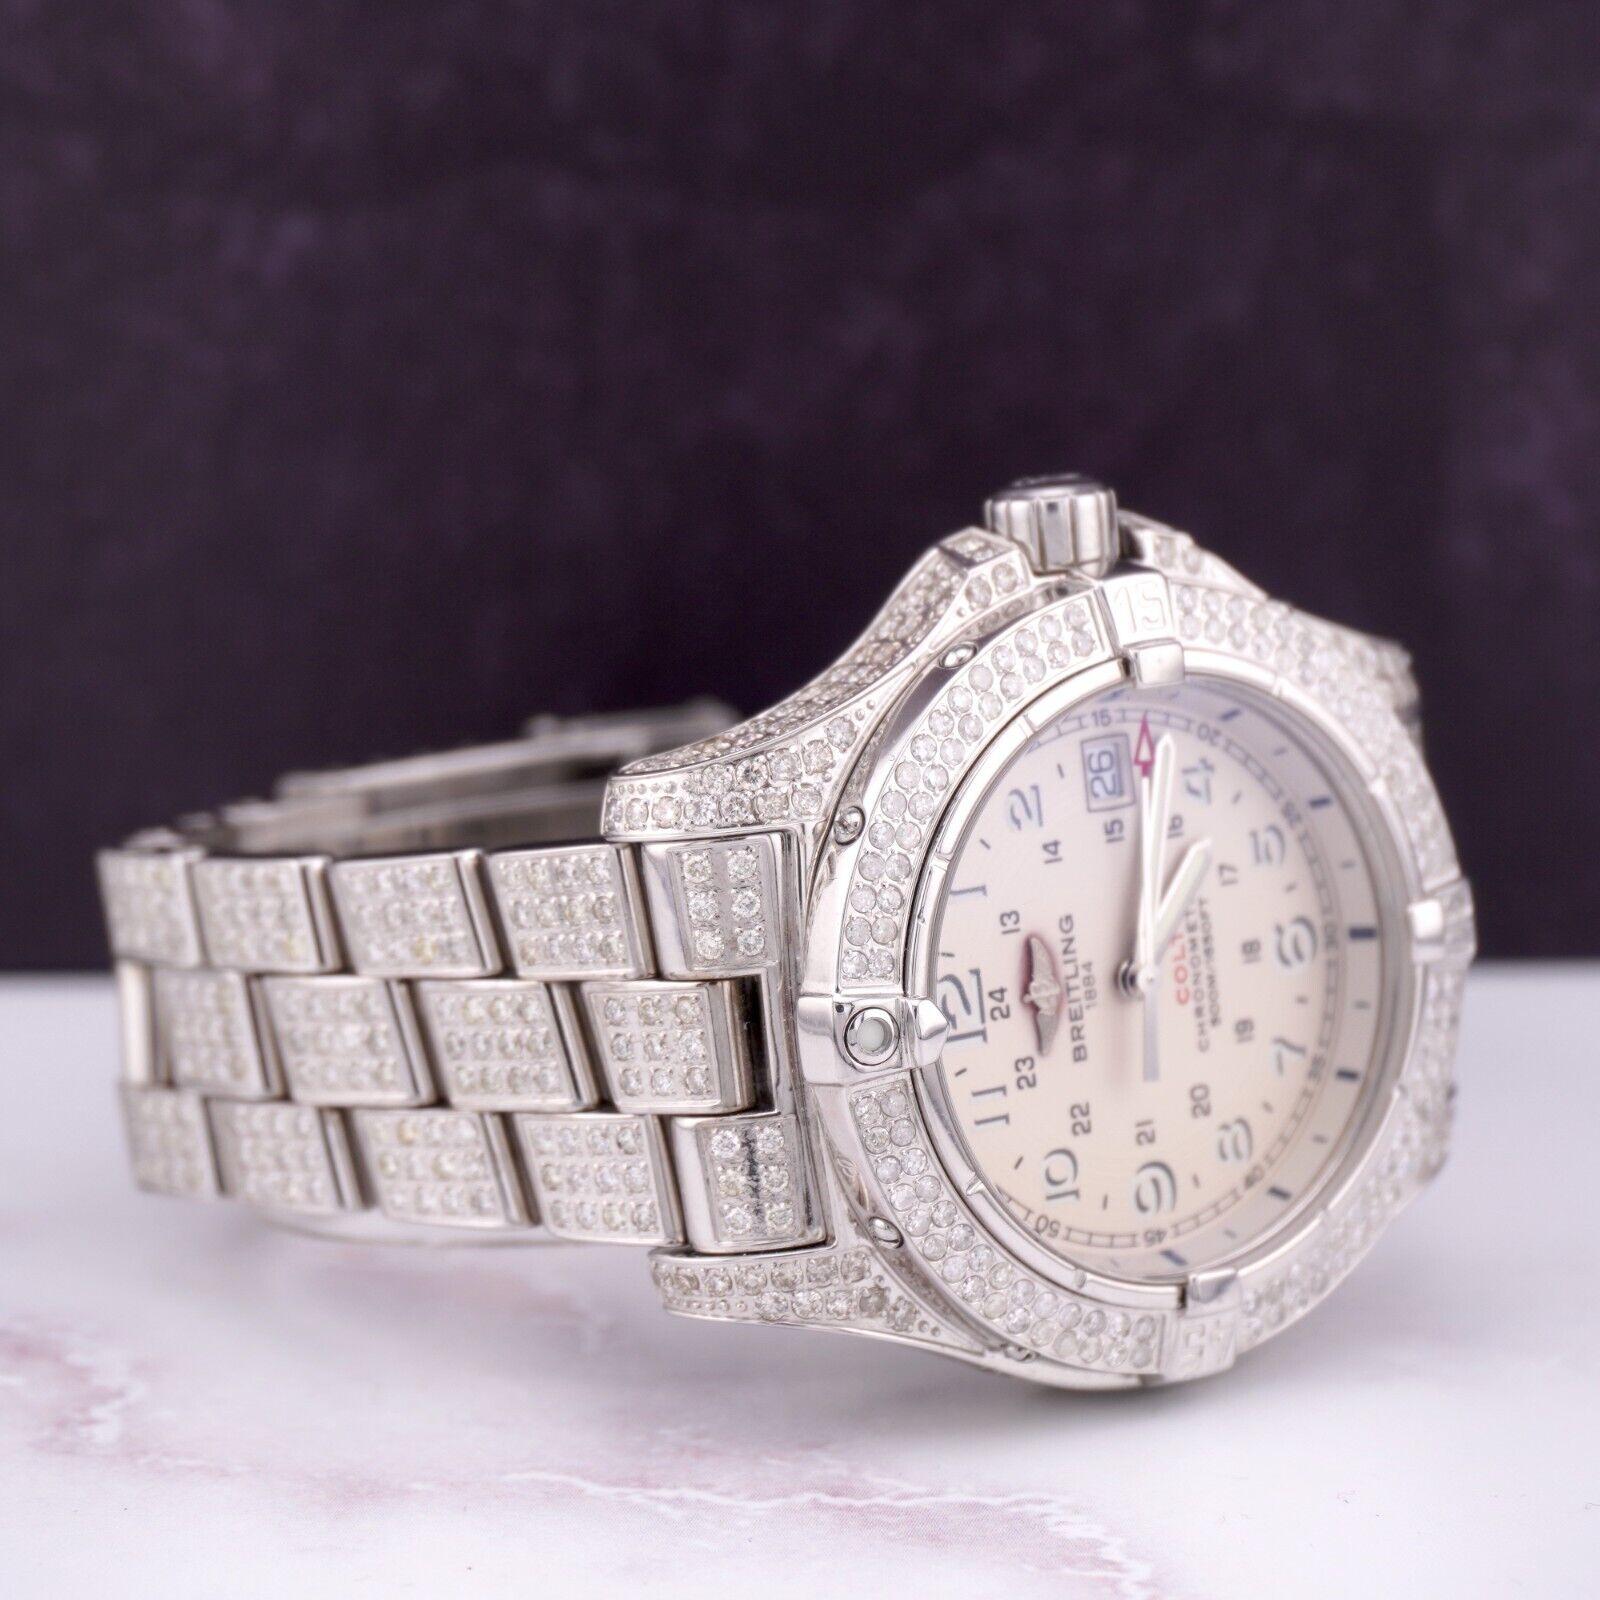 Breitling Colt II 41mm Watch. A Pre-owned watch w/ Gift Box. Watch is 100% Authentic and Comes with Authenticity Card. Watch Reference is A74380 and is in Excellent Condition (See Pictures). The dial white is White is and material is Stainless